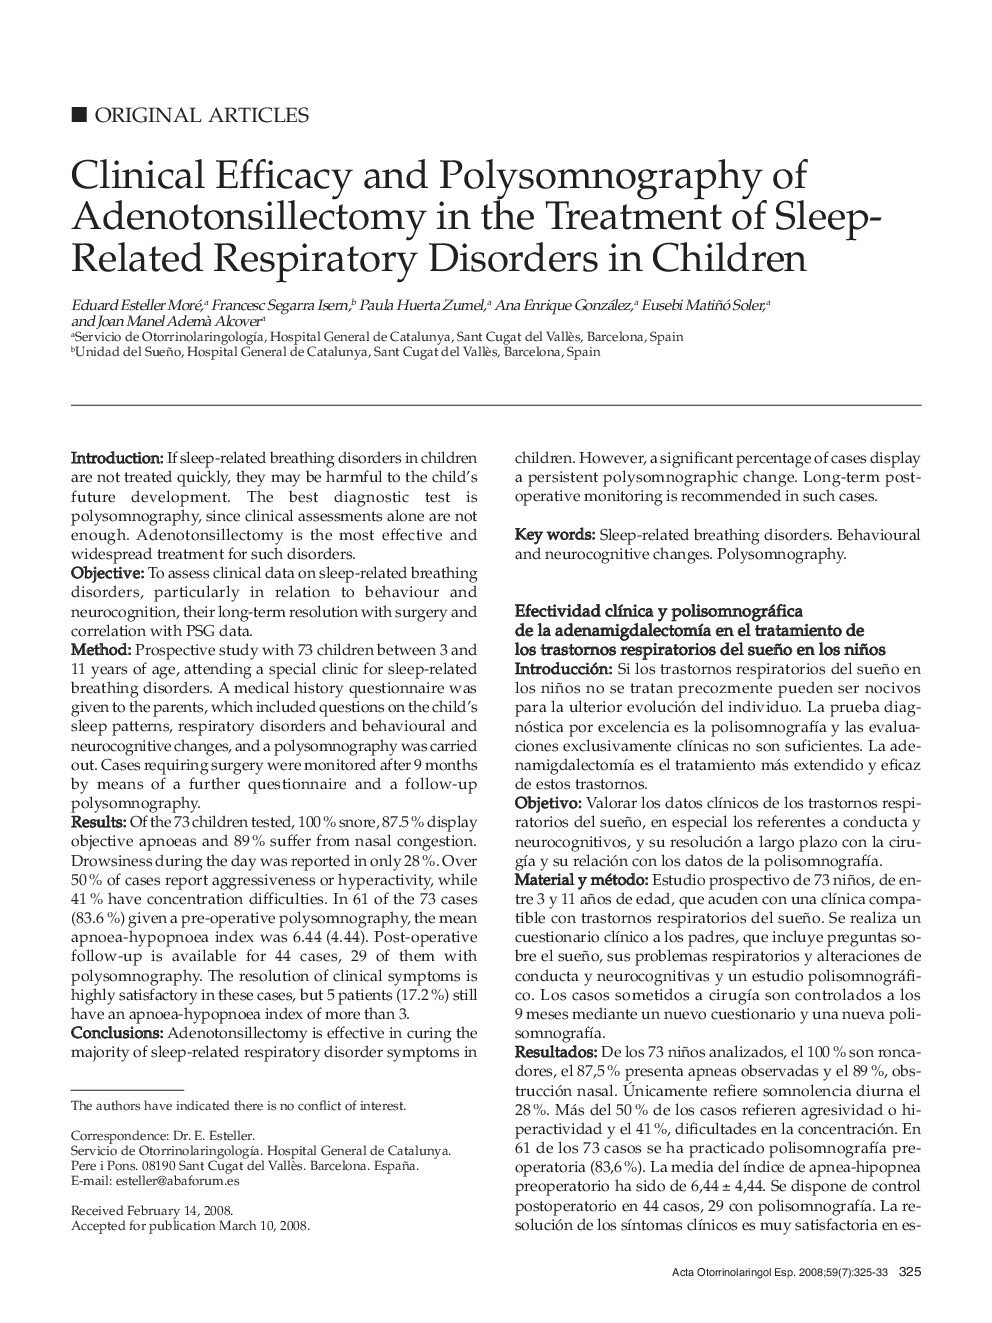 Clinical Efficacy and Polysomnography of Adenotonsillectomy in the Treatment of Sleep-Related Respiratory Disorders in Children